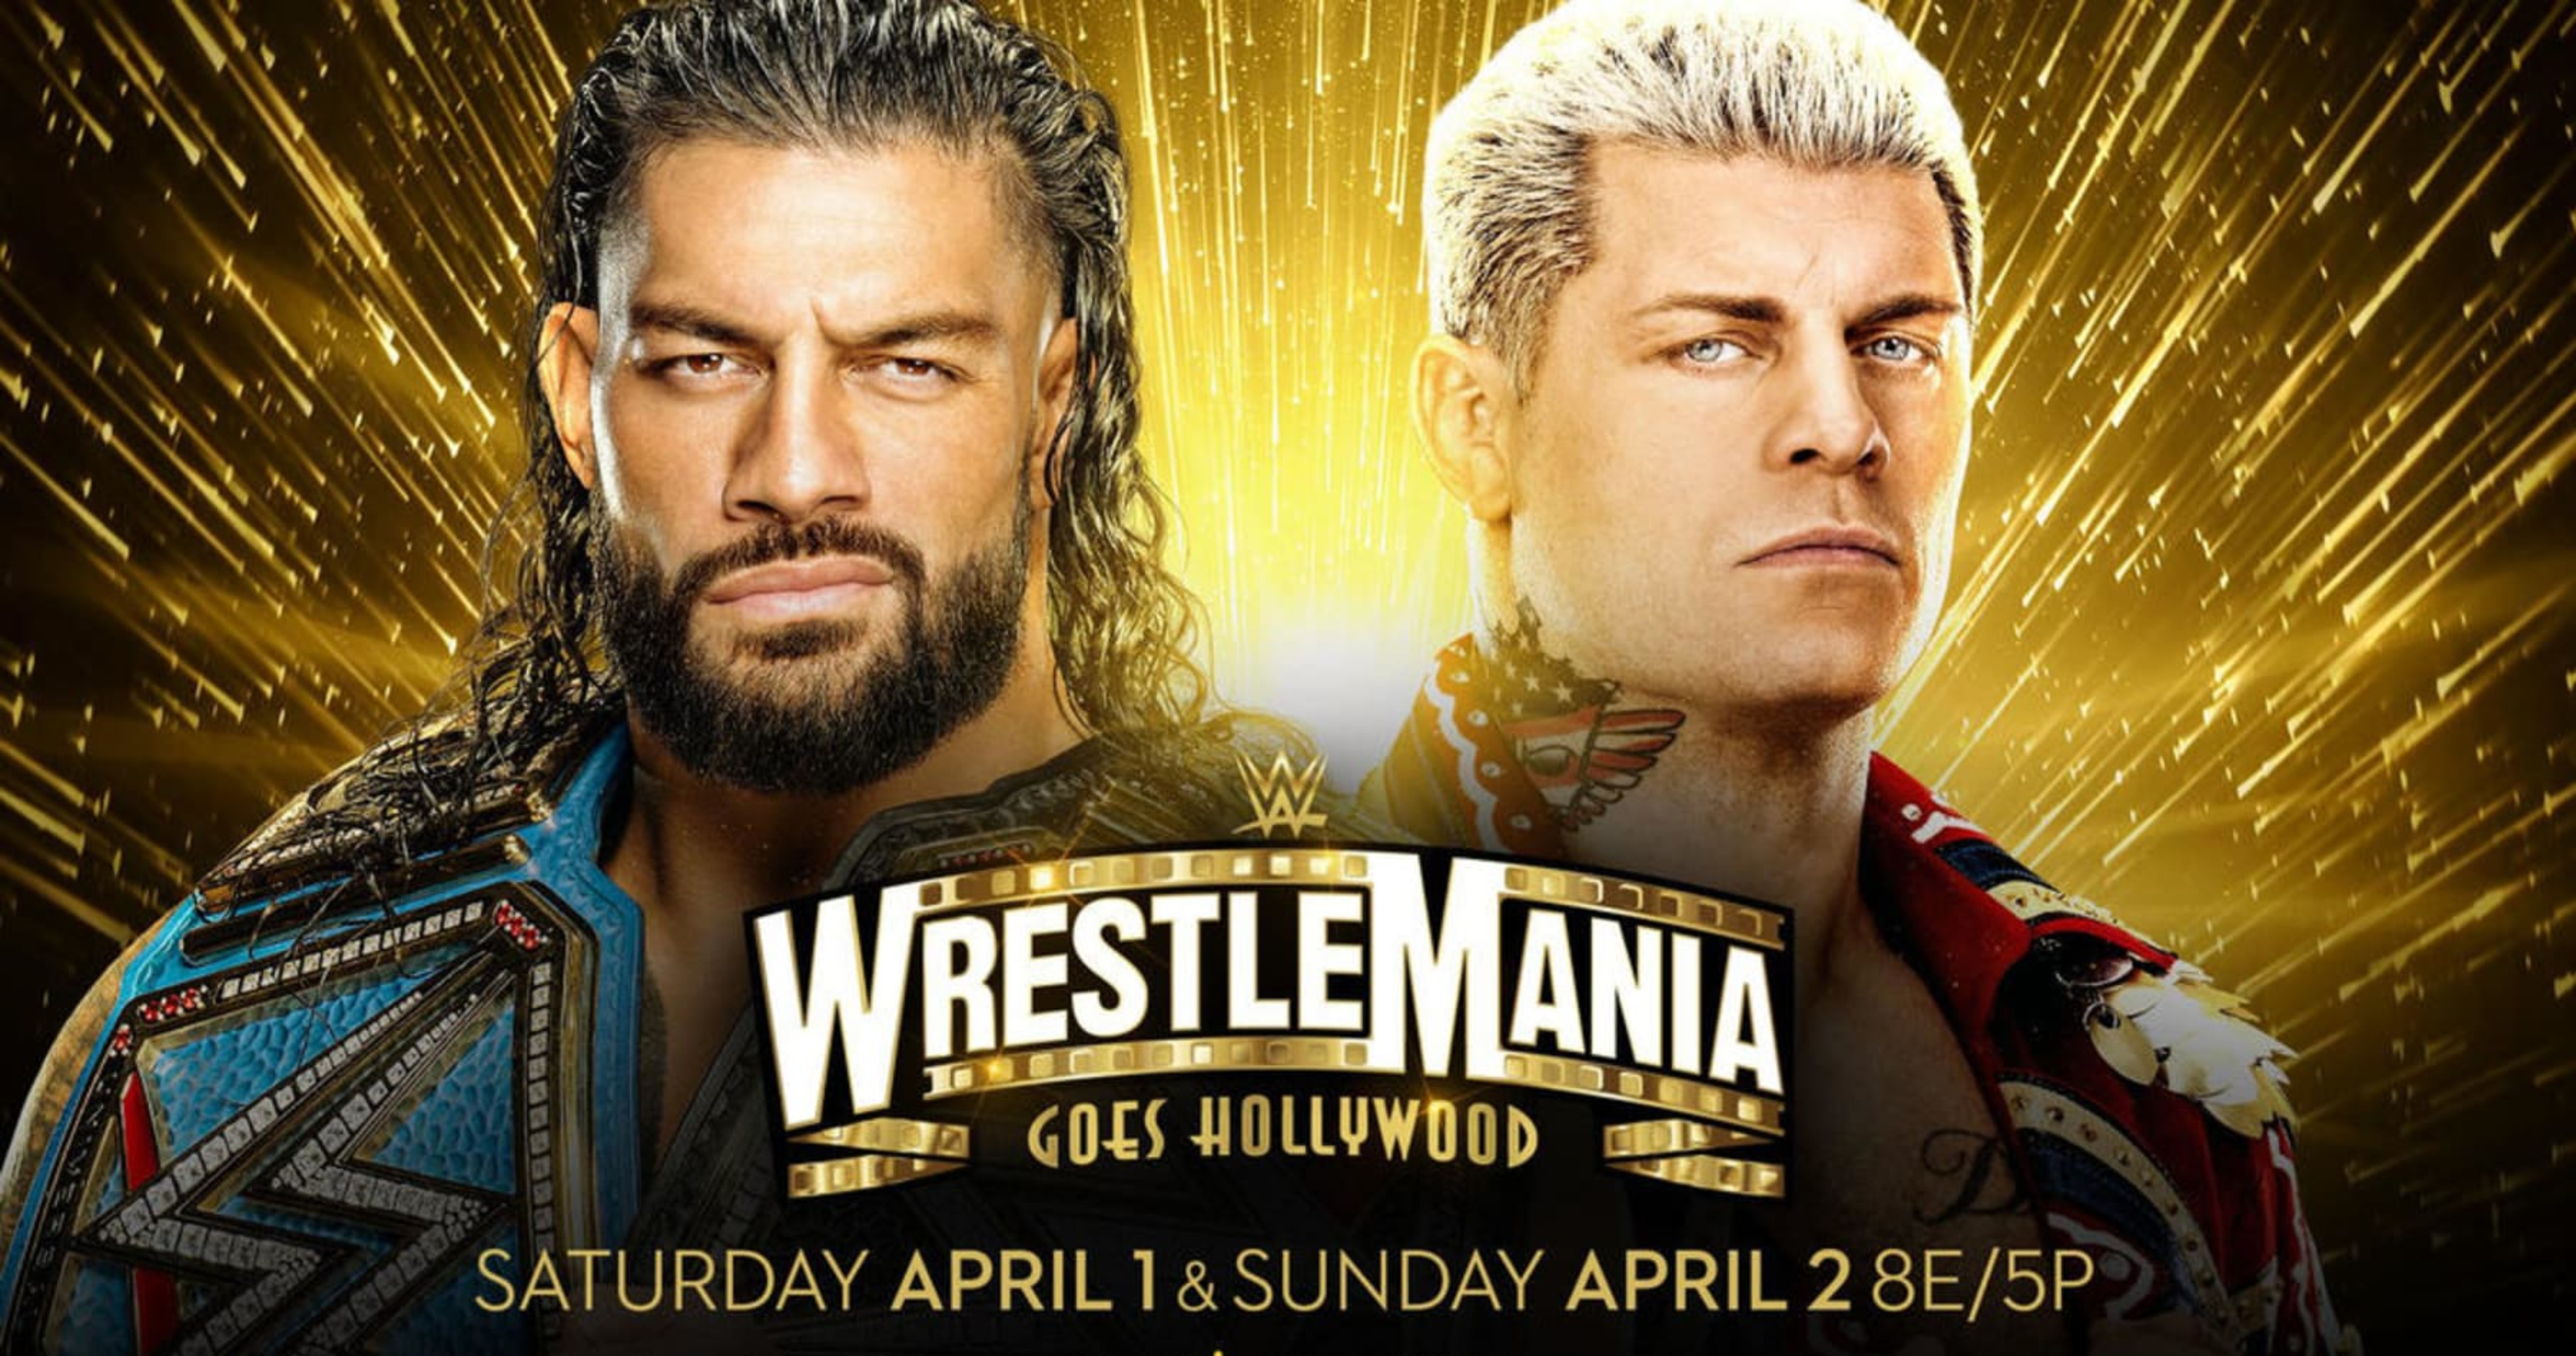 Early WrestleMania Announcements Give Triple H, WWE Time to Build